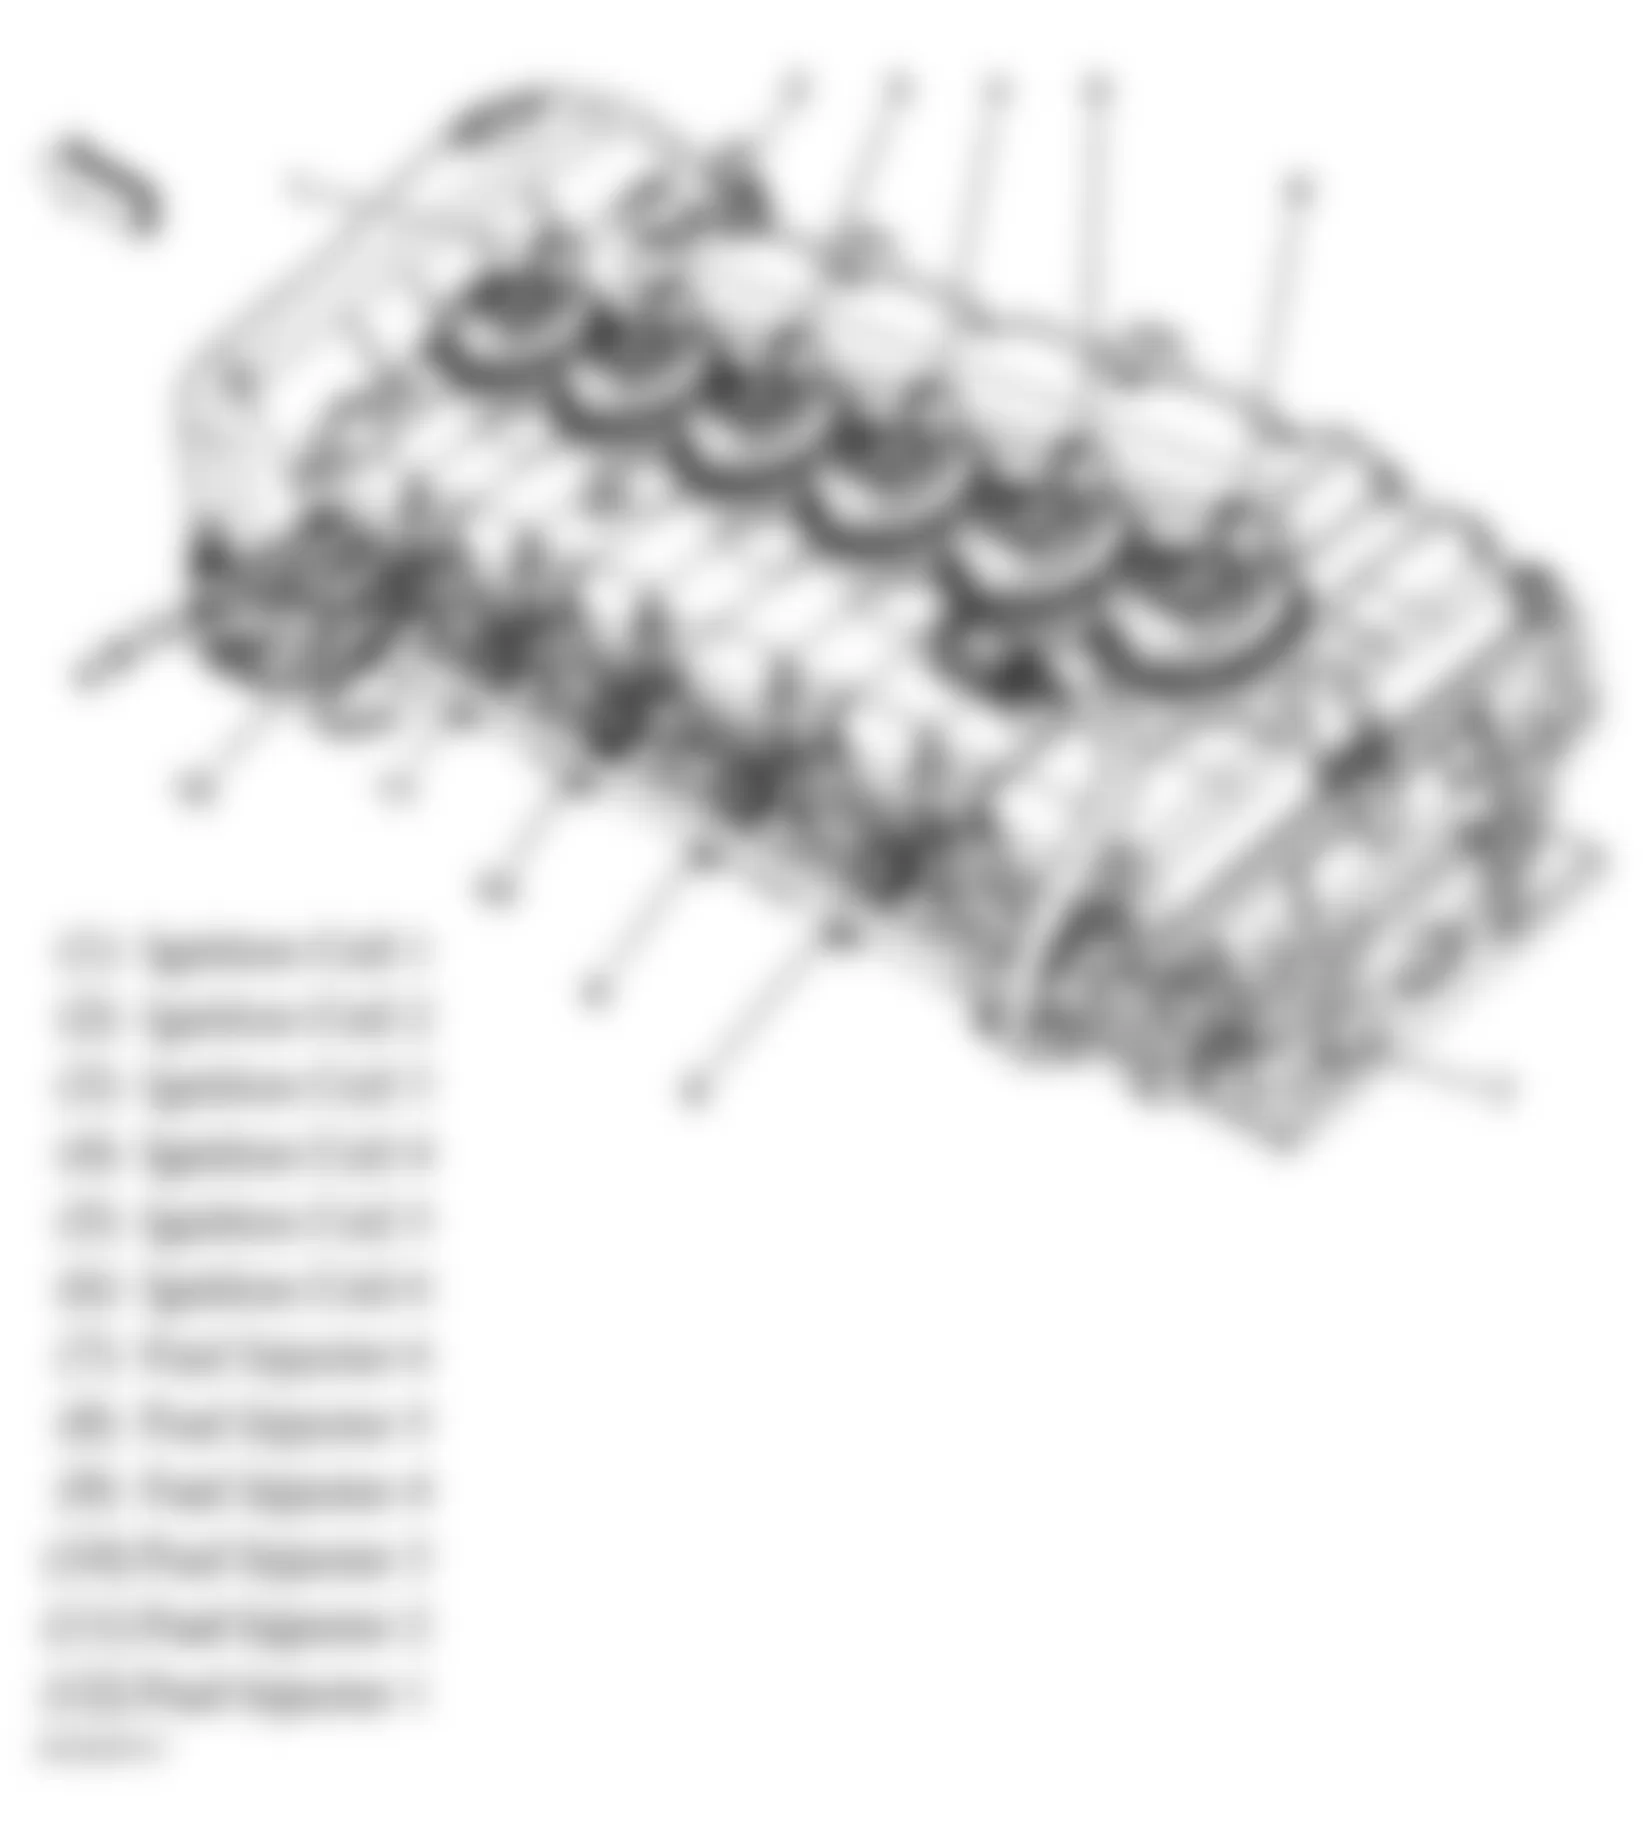 GMC Envoy 2005 - Component Locations -  Top Of Engine (4.2L)